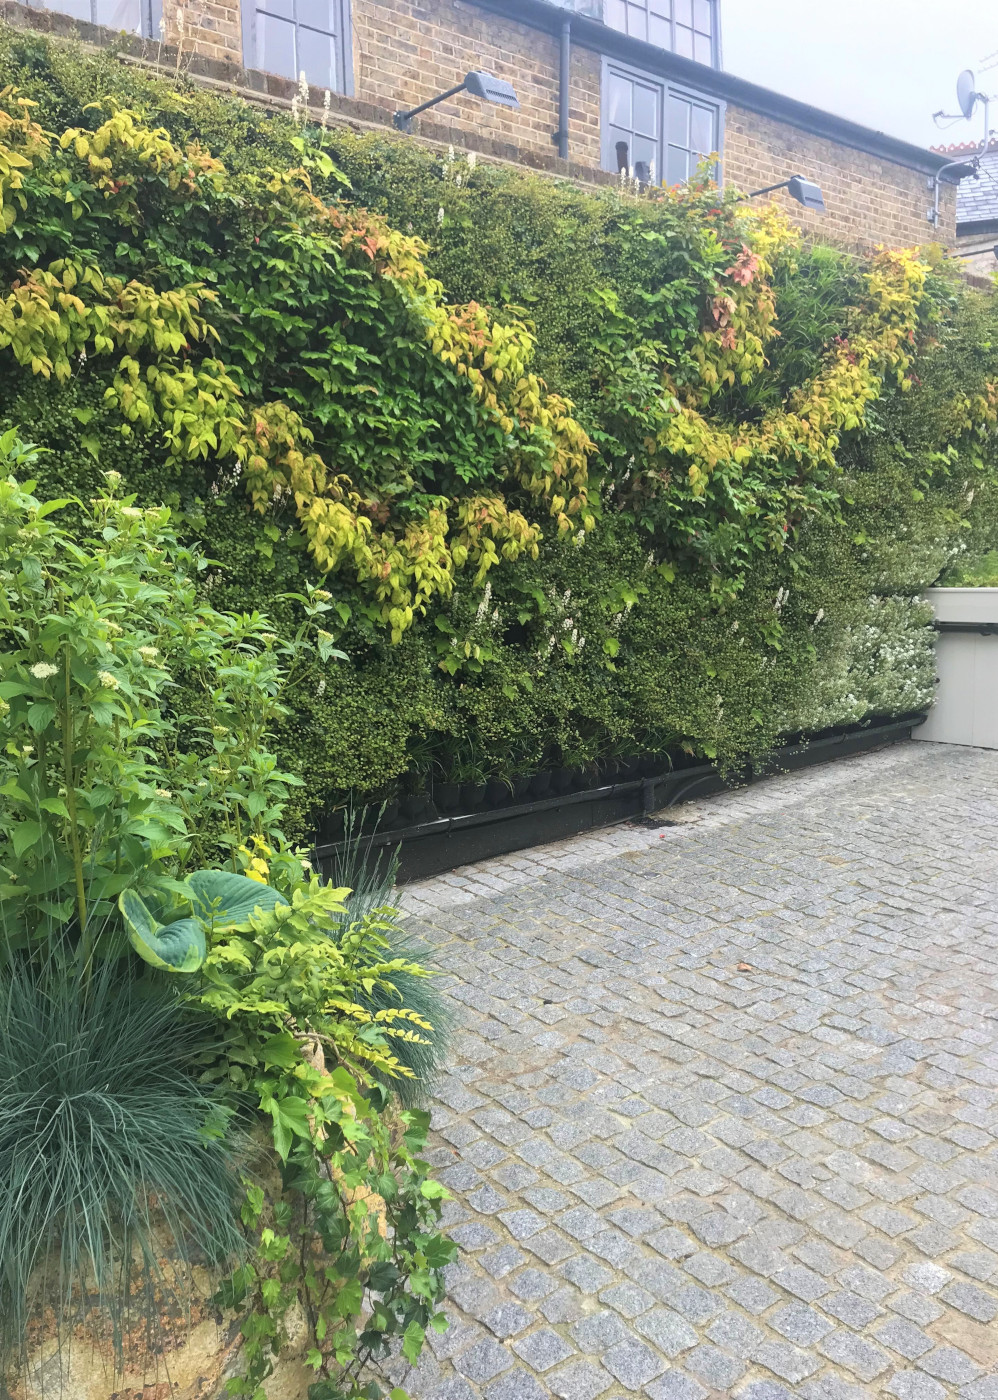 Living Walls for Property Developers Image of courtyard garden with Living Wall